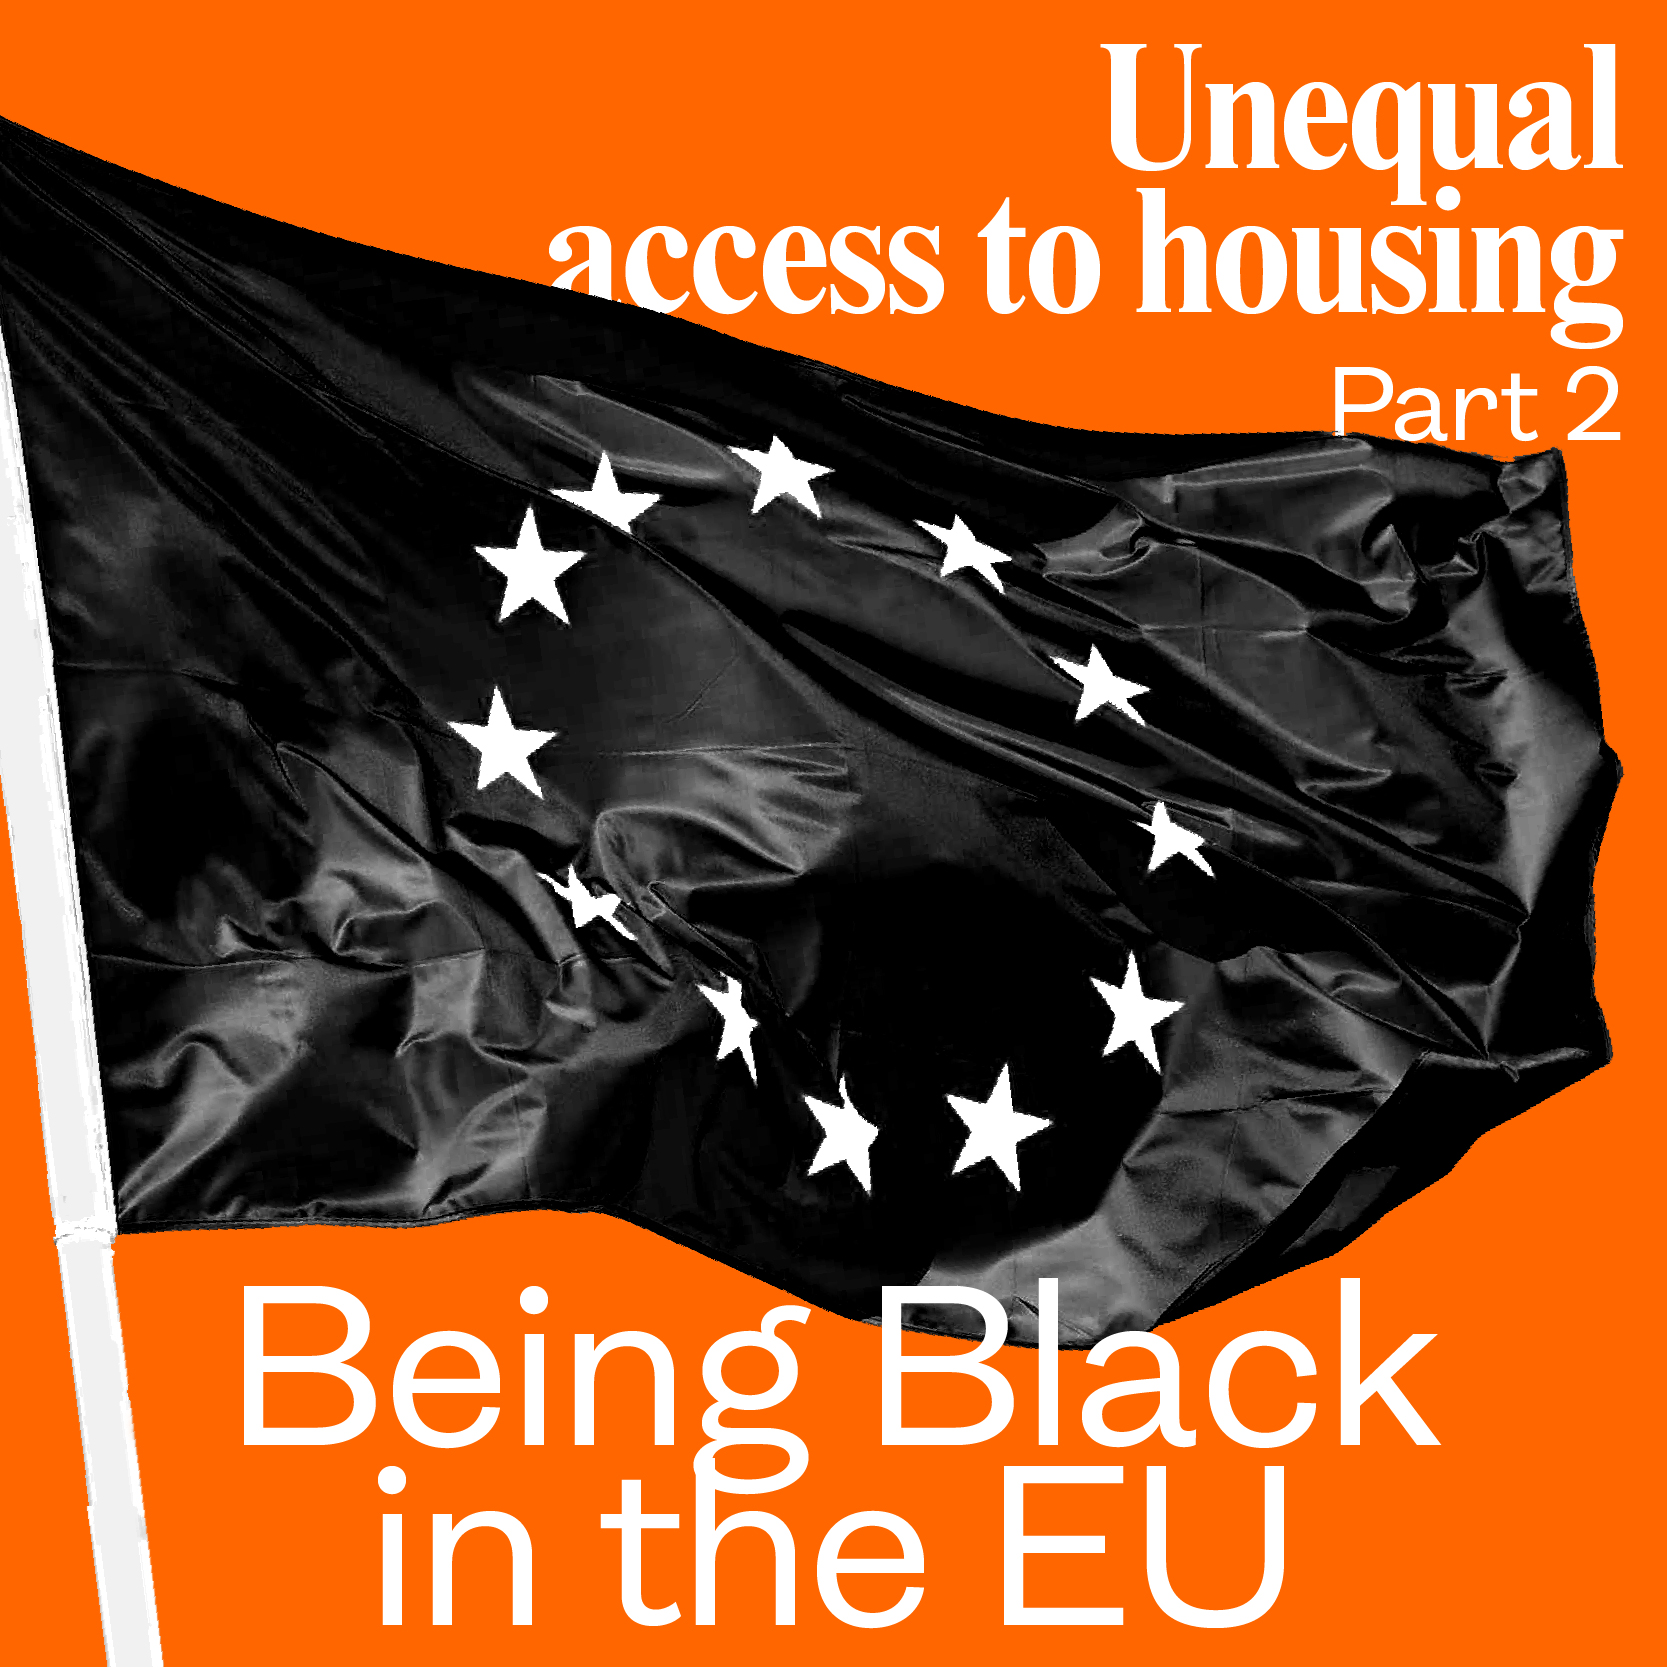 Being Black in the EU – Racial discrimination in access to housing